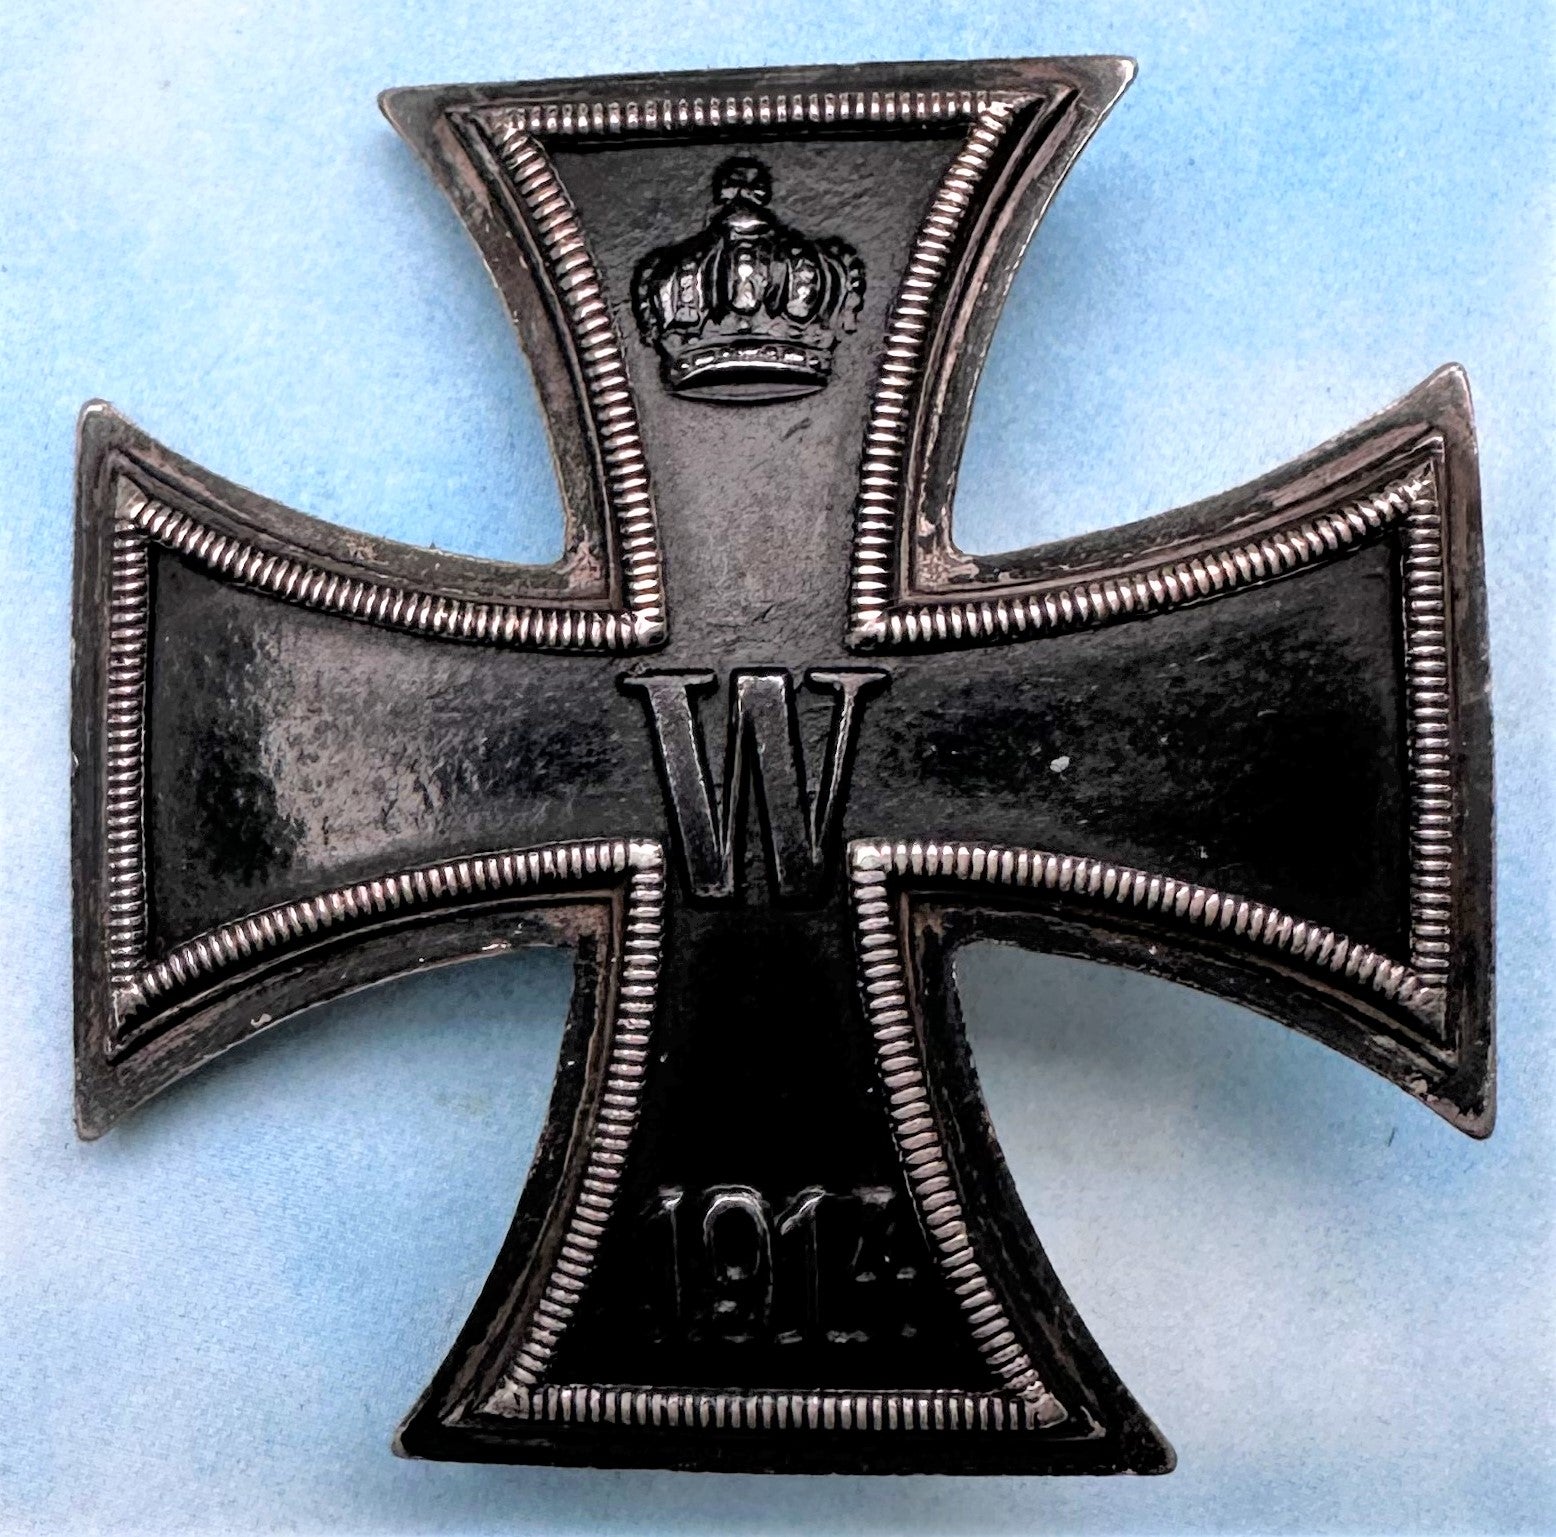 German 1914 Iron Cross 1st Class - Low Vaulted - .800 Silver - in the Original Presentation Case - Derrittmeister Militaria Group